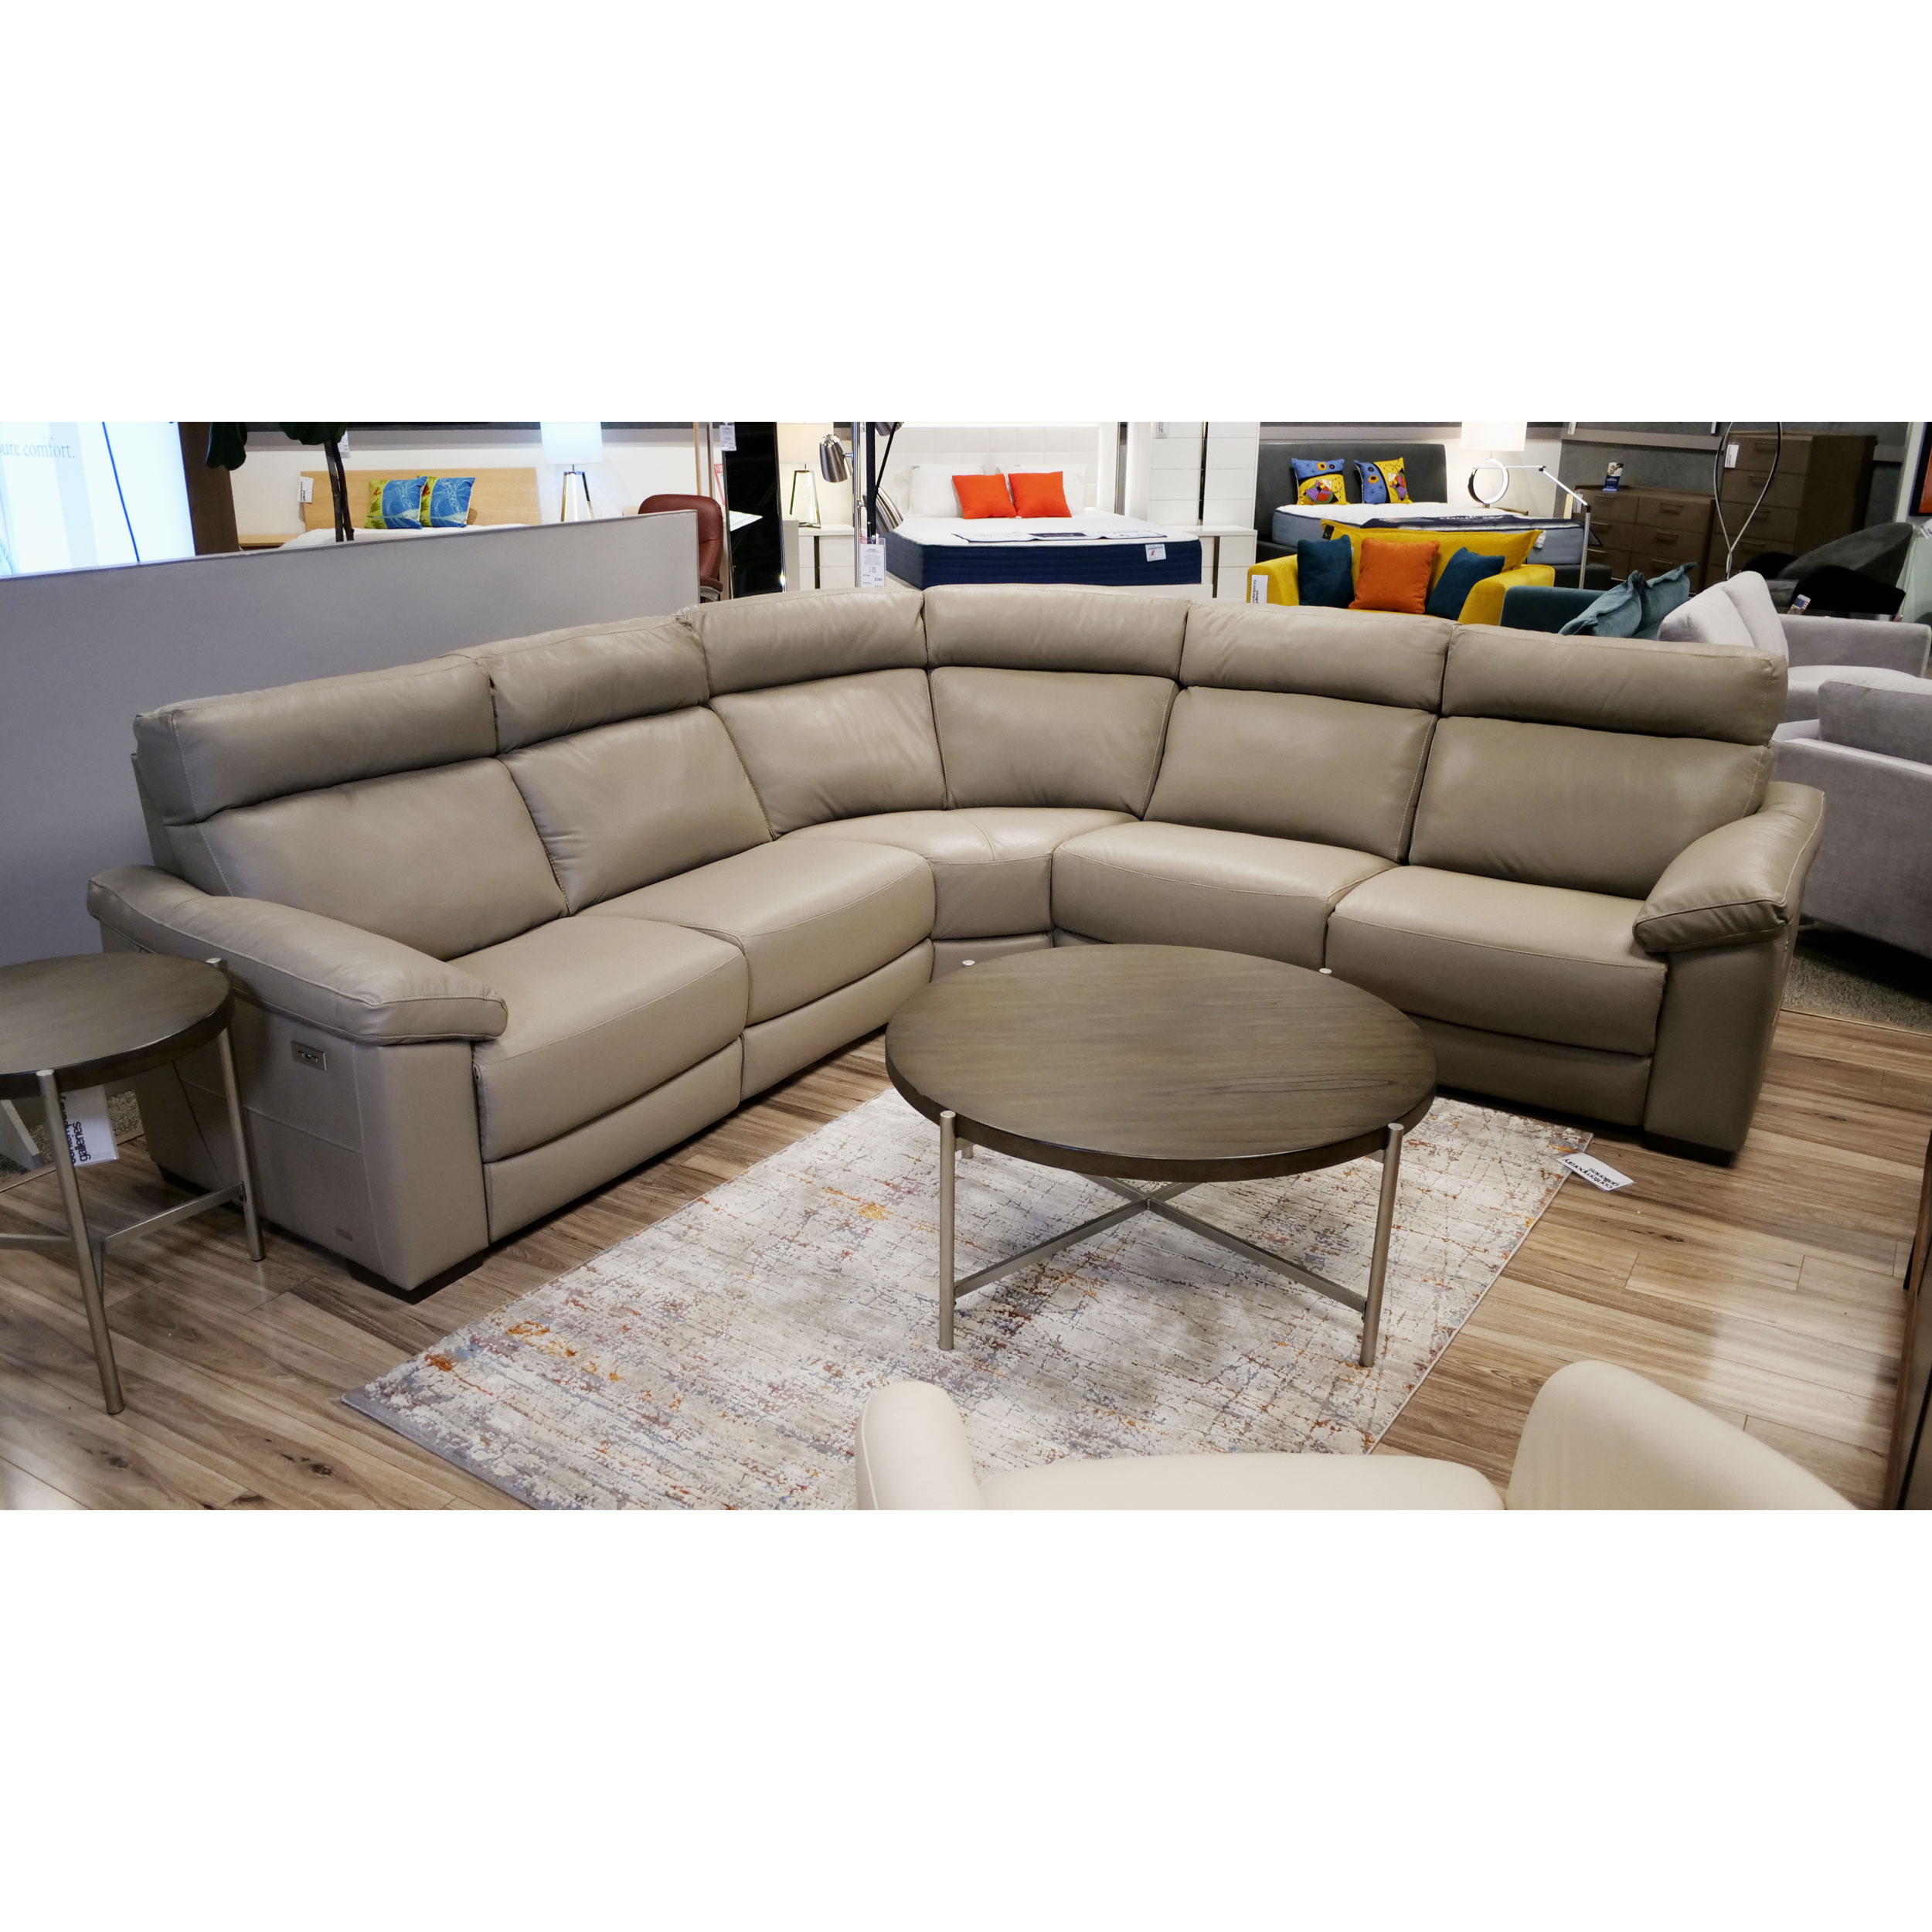 Natuzzi Leather Sectional with Recliners